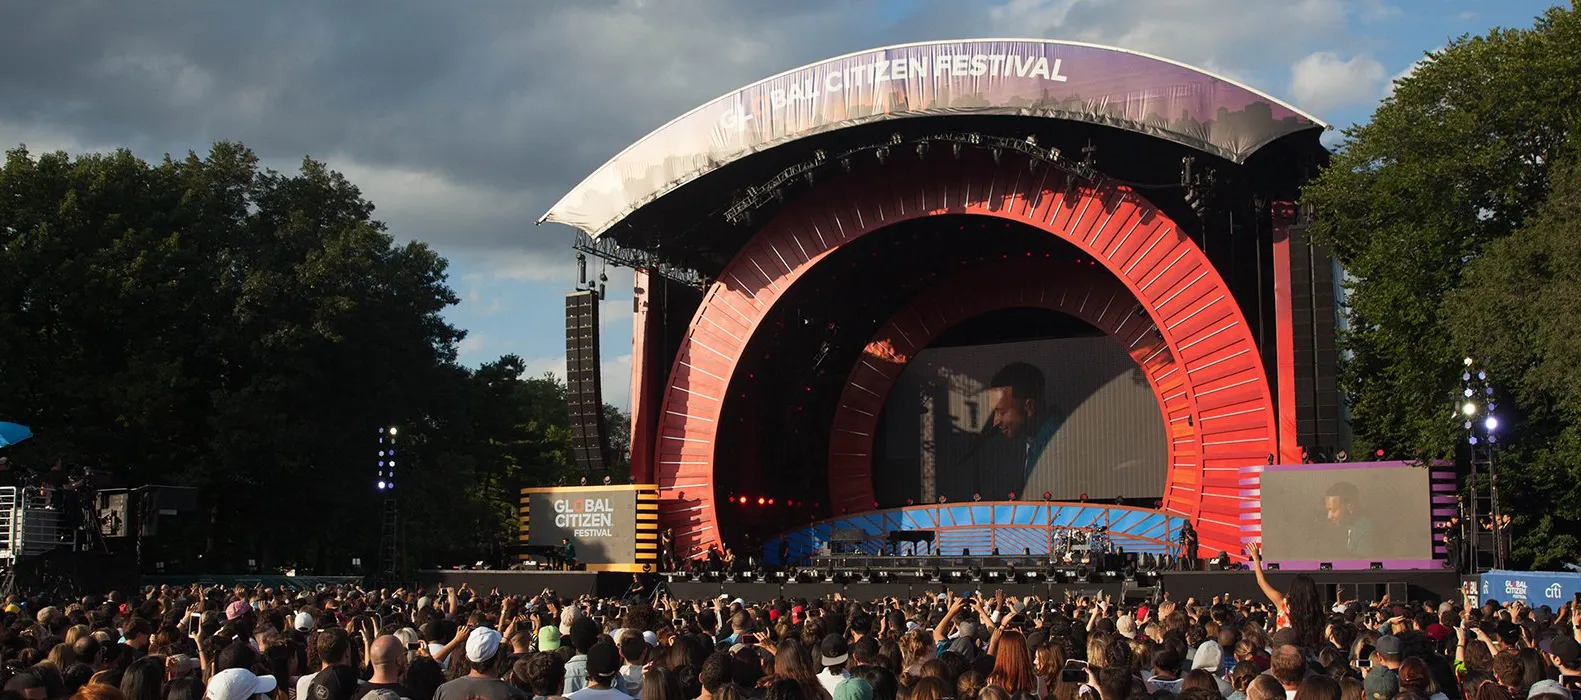 How to Watch the Global Citizen Festival Live Online